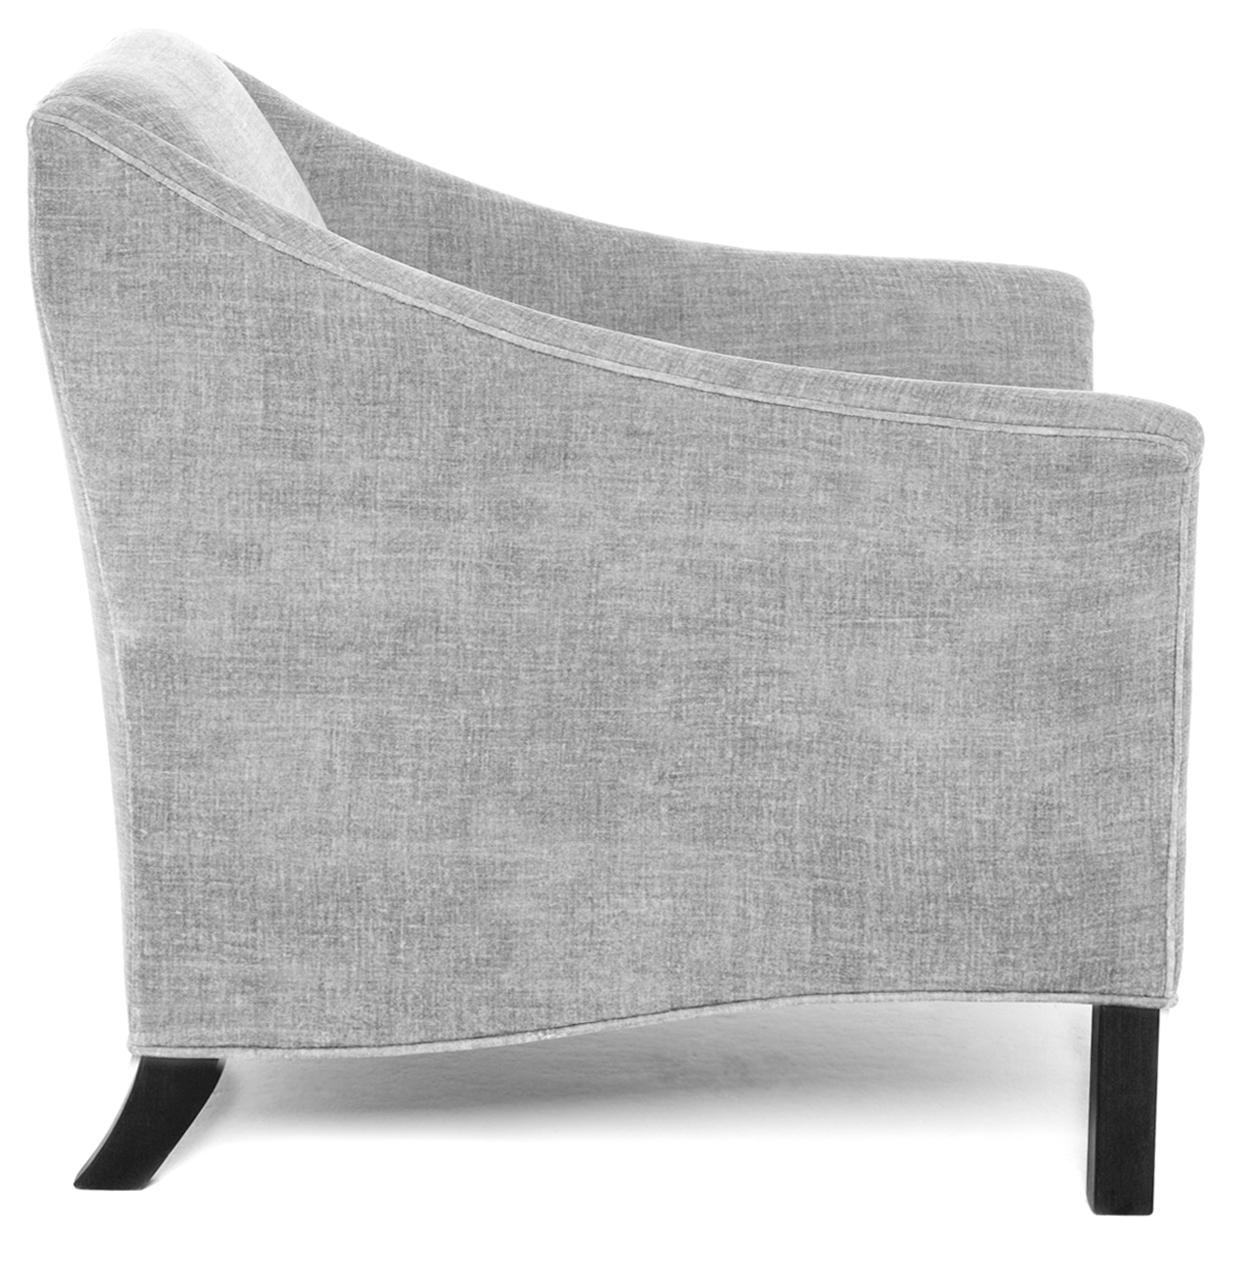 The Isabelle chair has a tight upholstered back and loose seat cushion. Tapered front legs and curved back legs are made of blackened hardwood.

Made to order and handcrafted in the USA. Available in wool in a range of colors including dark gray,